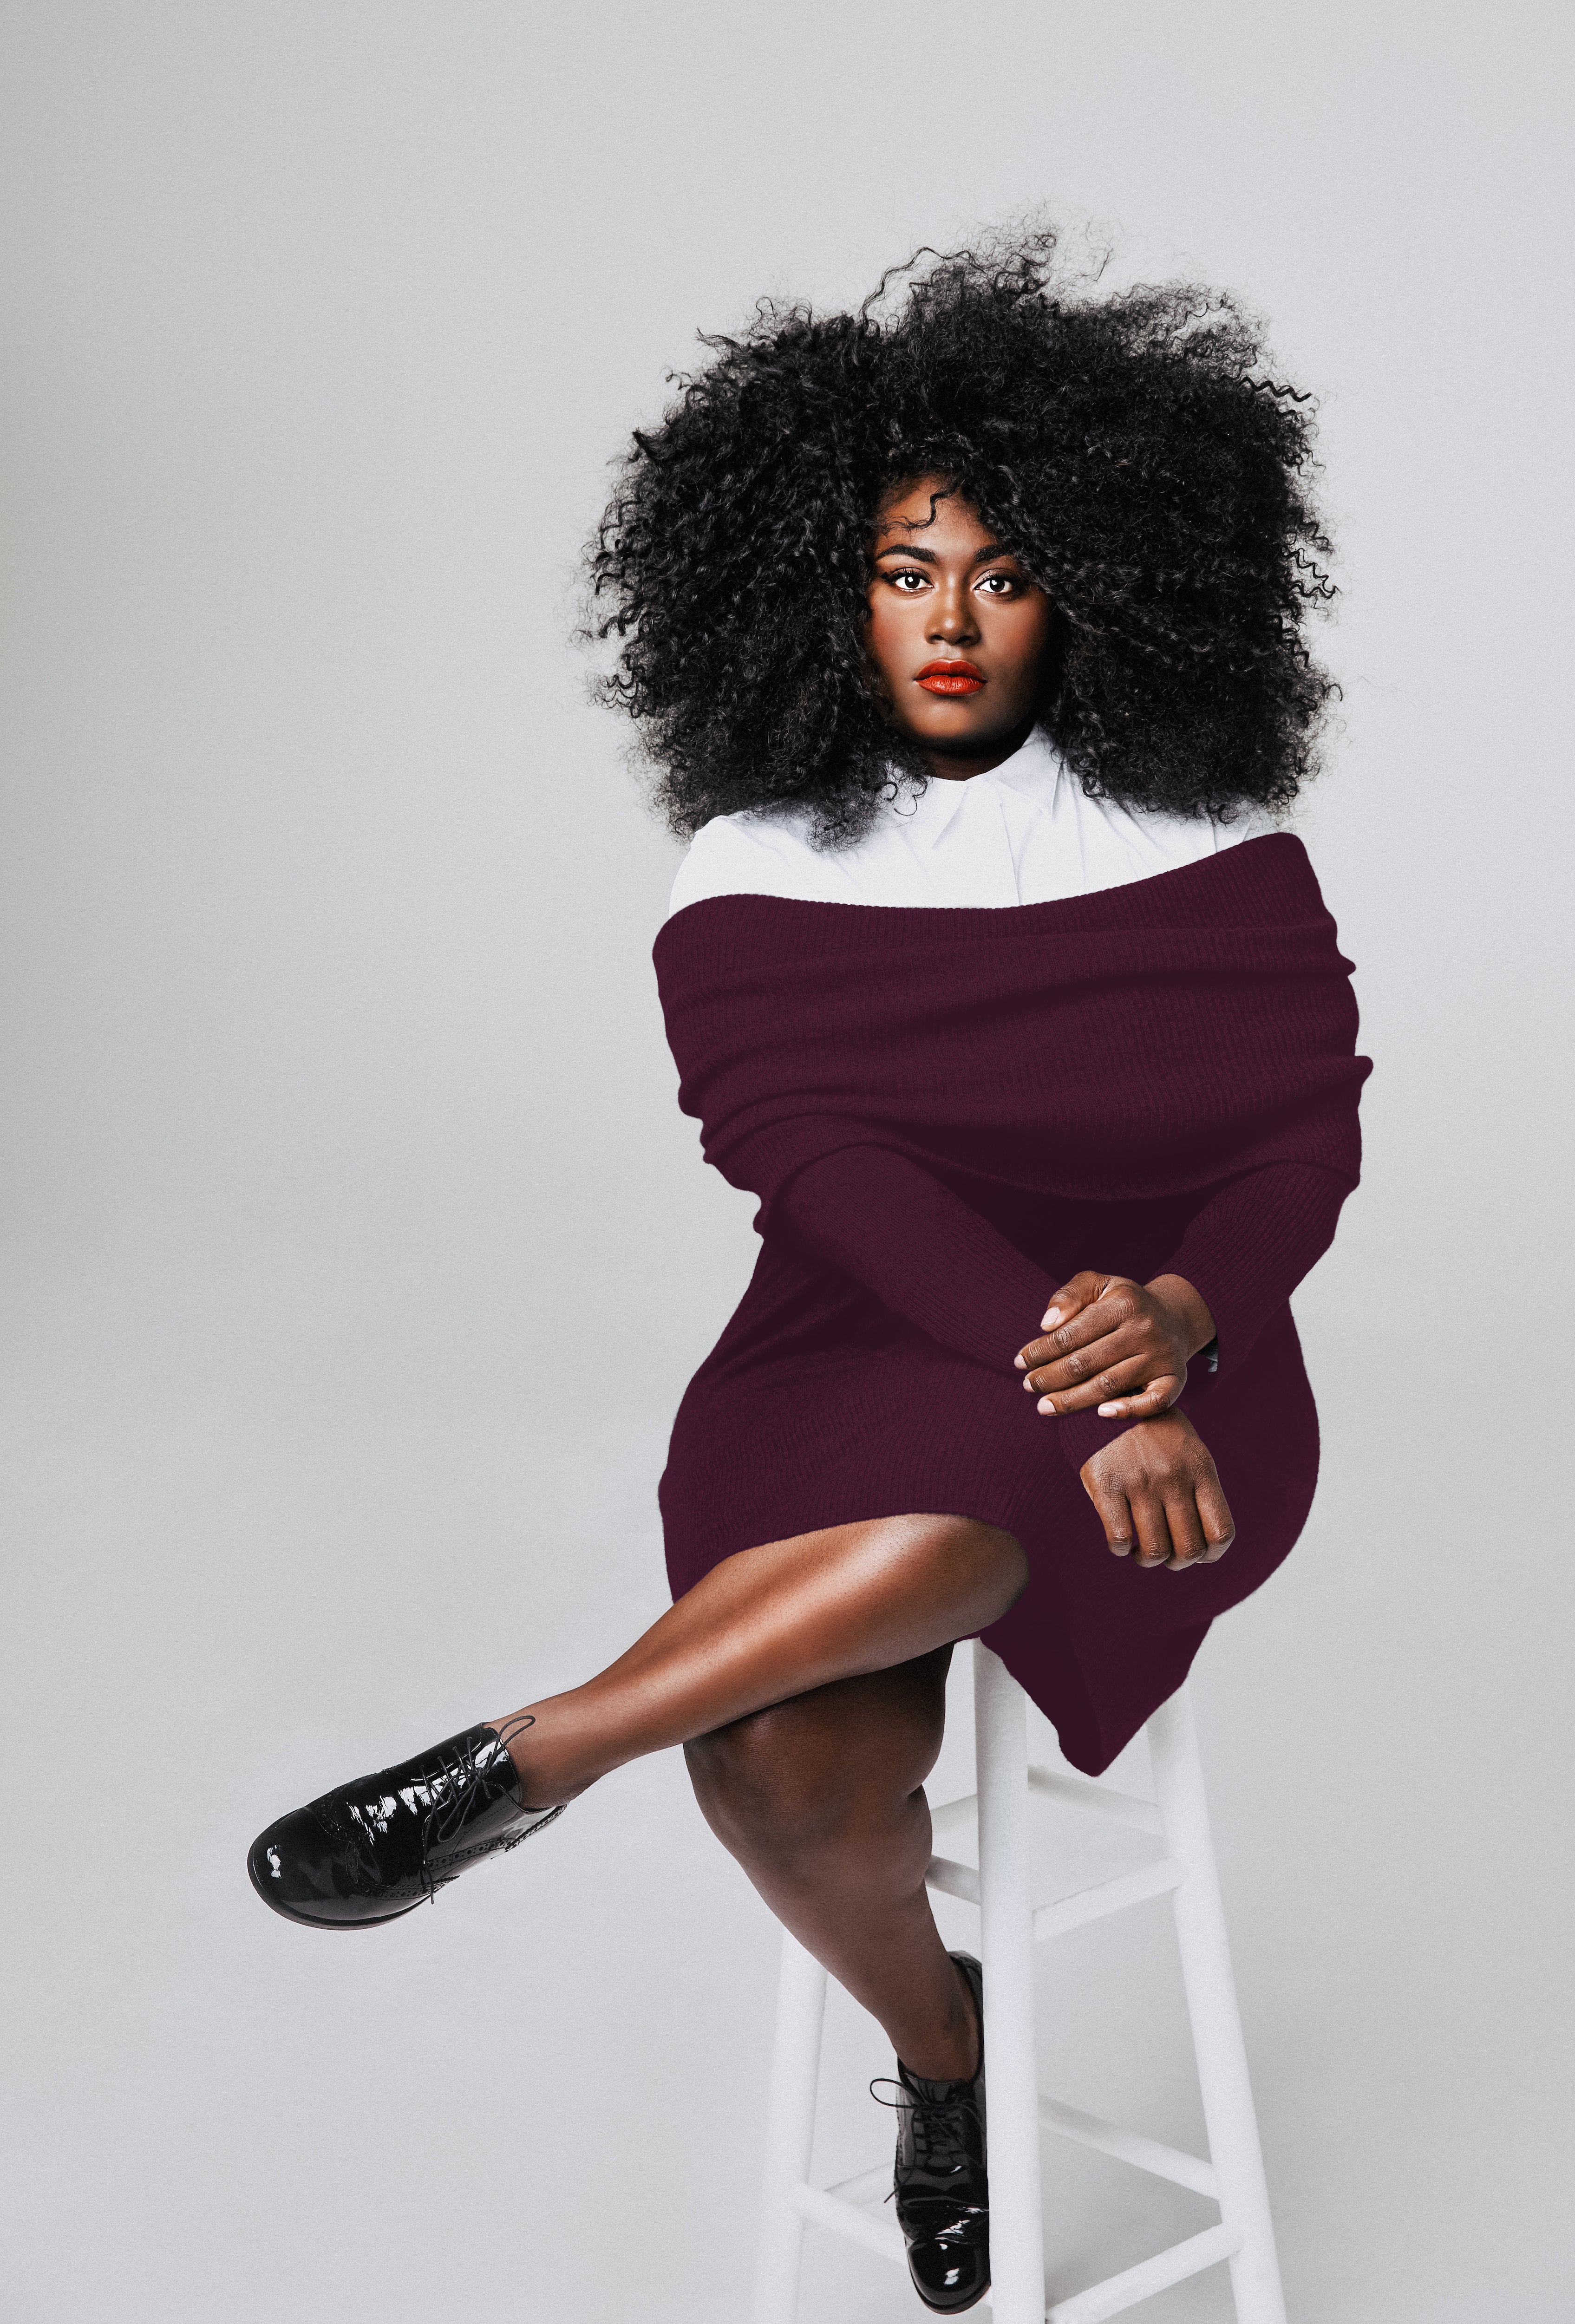 Danielle Brooks Stars In Lane Bryant’s New Campaign That Empowers Women To Love Their Bodies Despite Flaws
